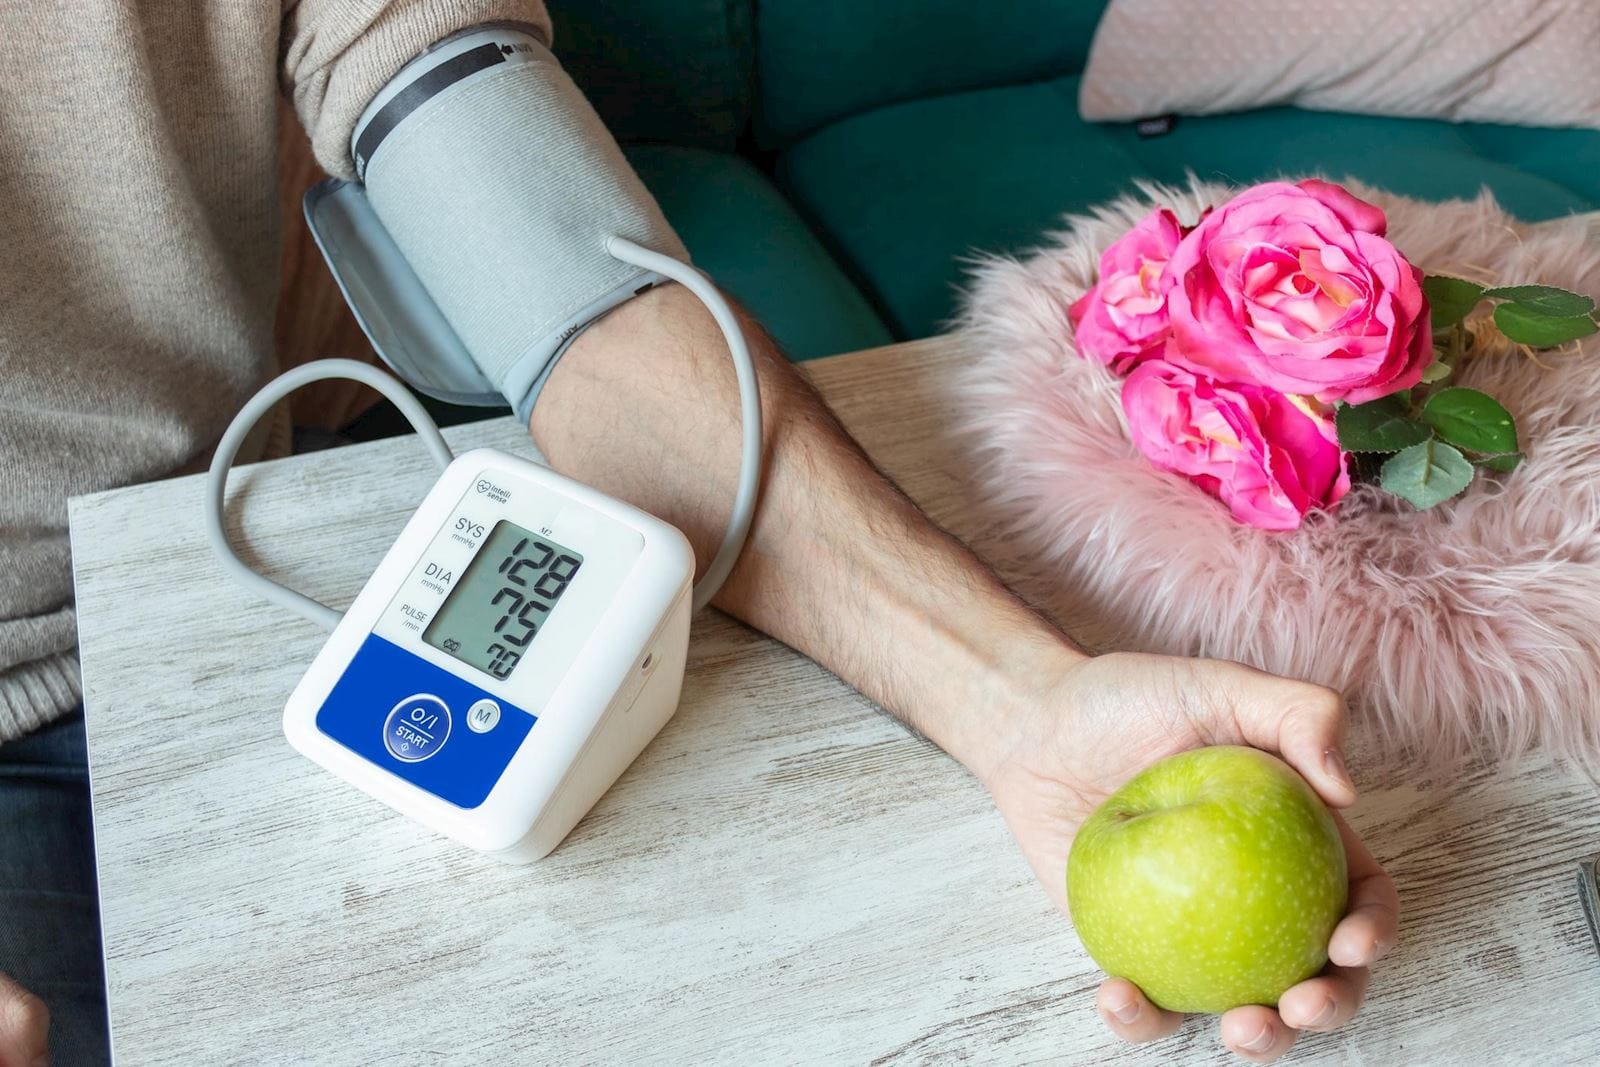 Man takes blood pressure with a cuff while holding an apple in his hand